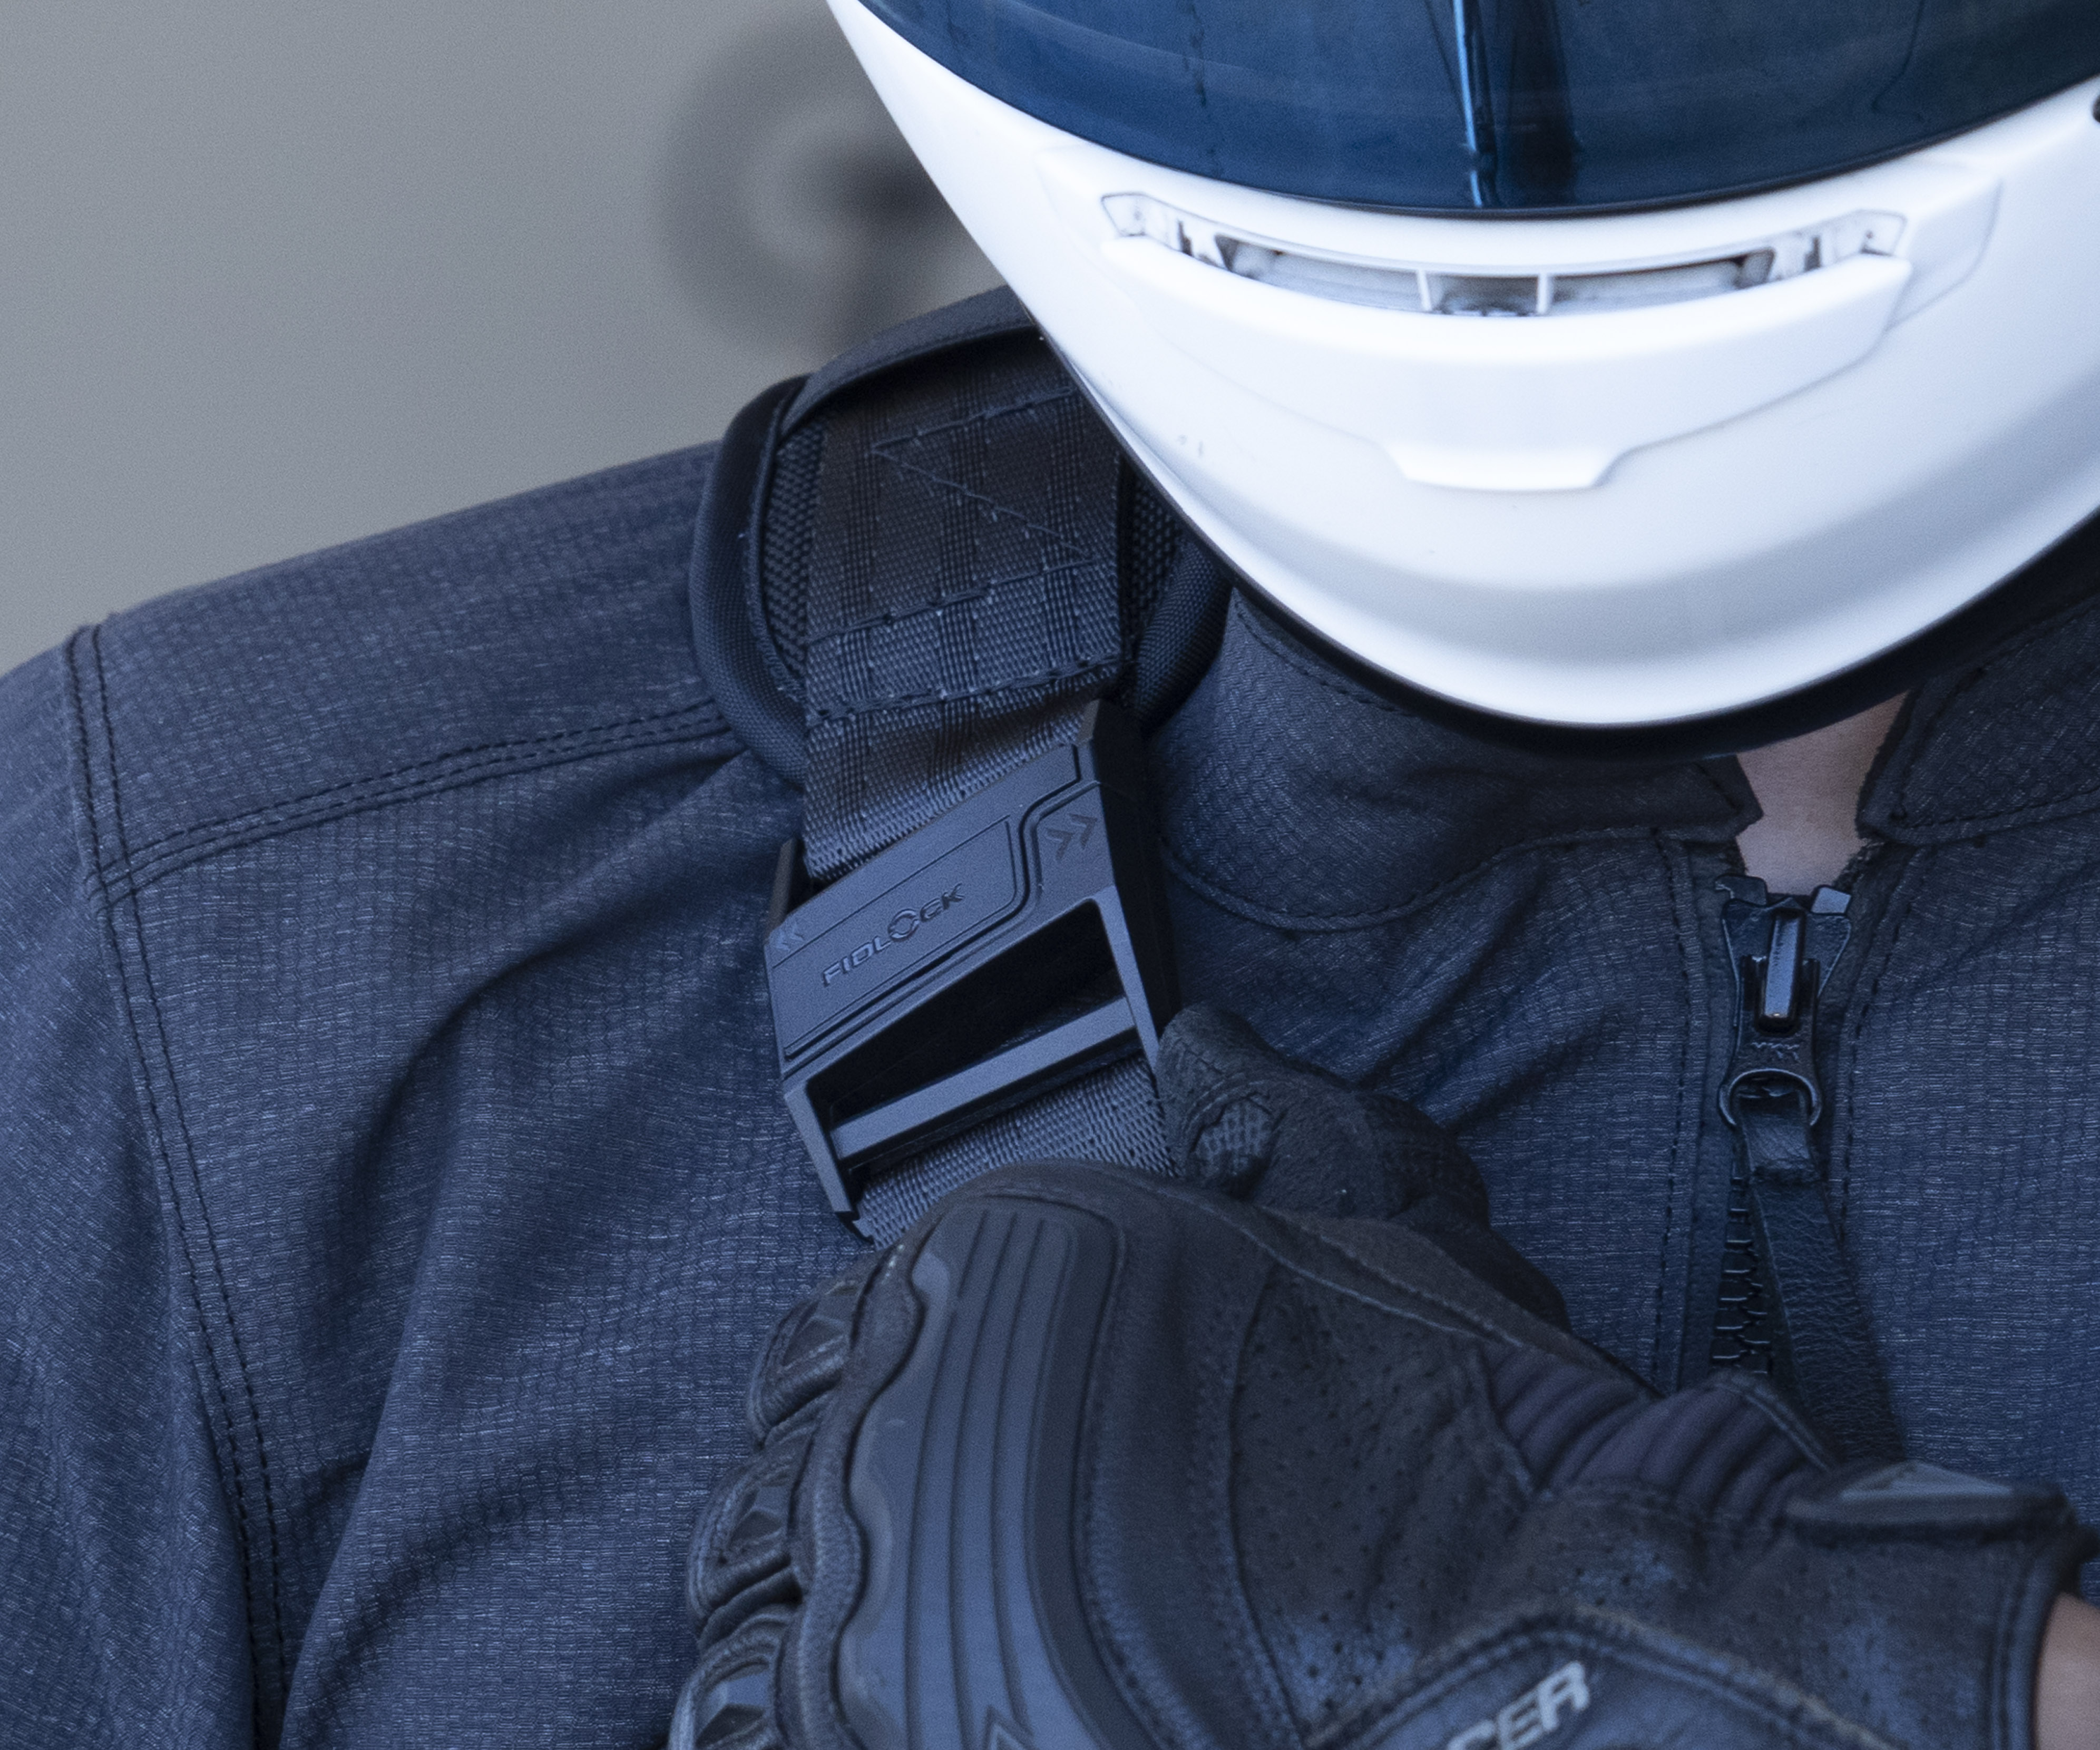 Magnetic Fidlock buckle positioned at shoulder for easy use without removing helmet and other gear